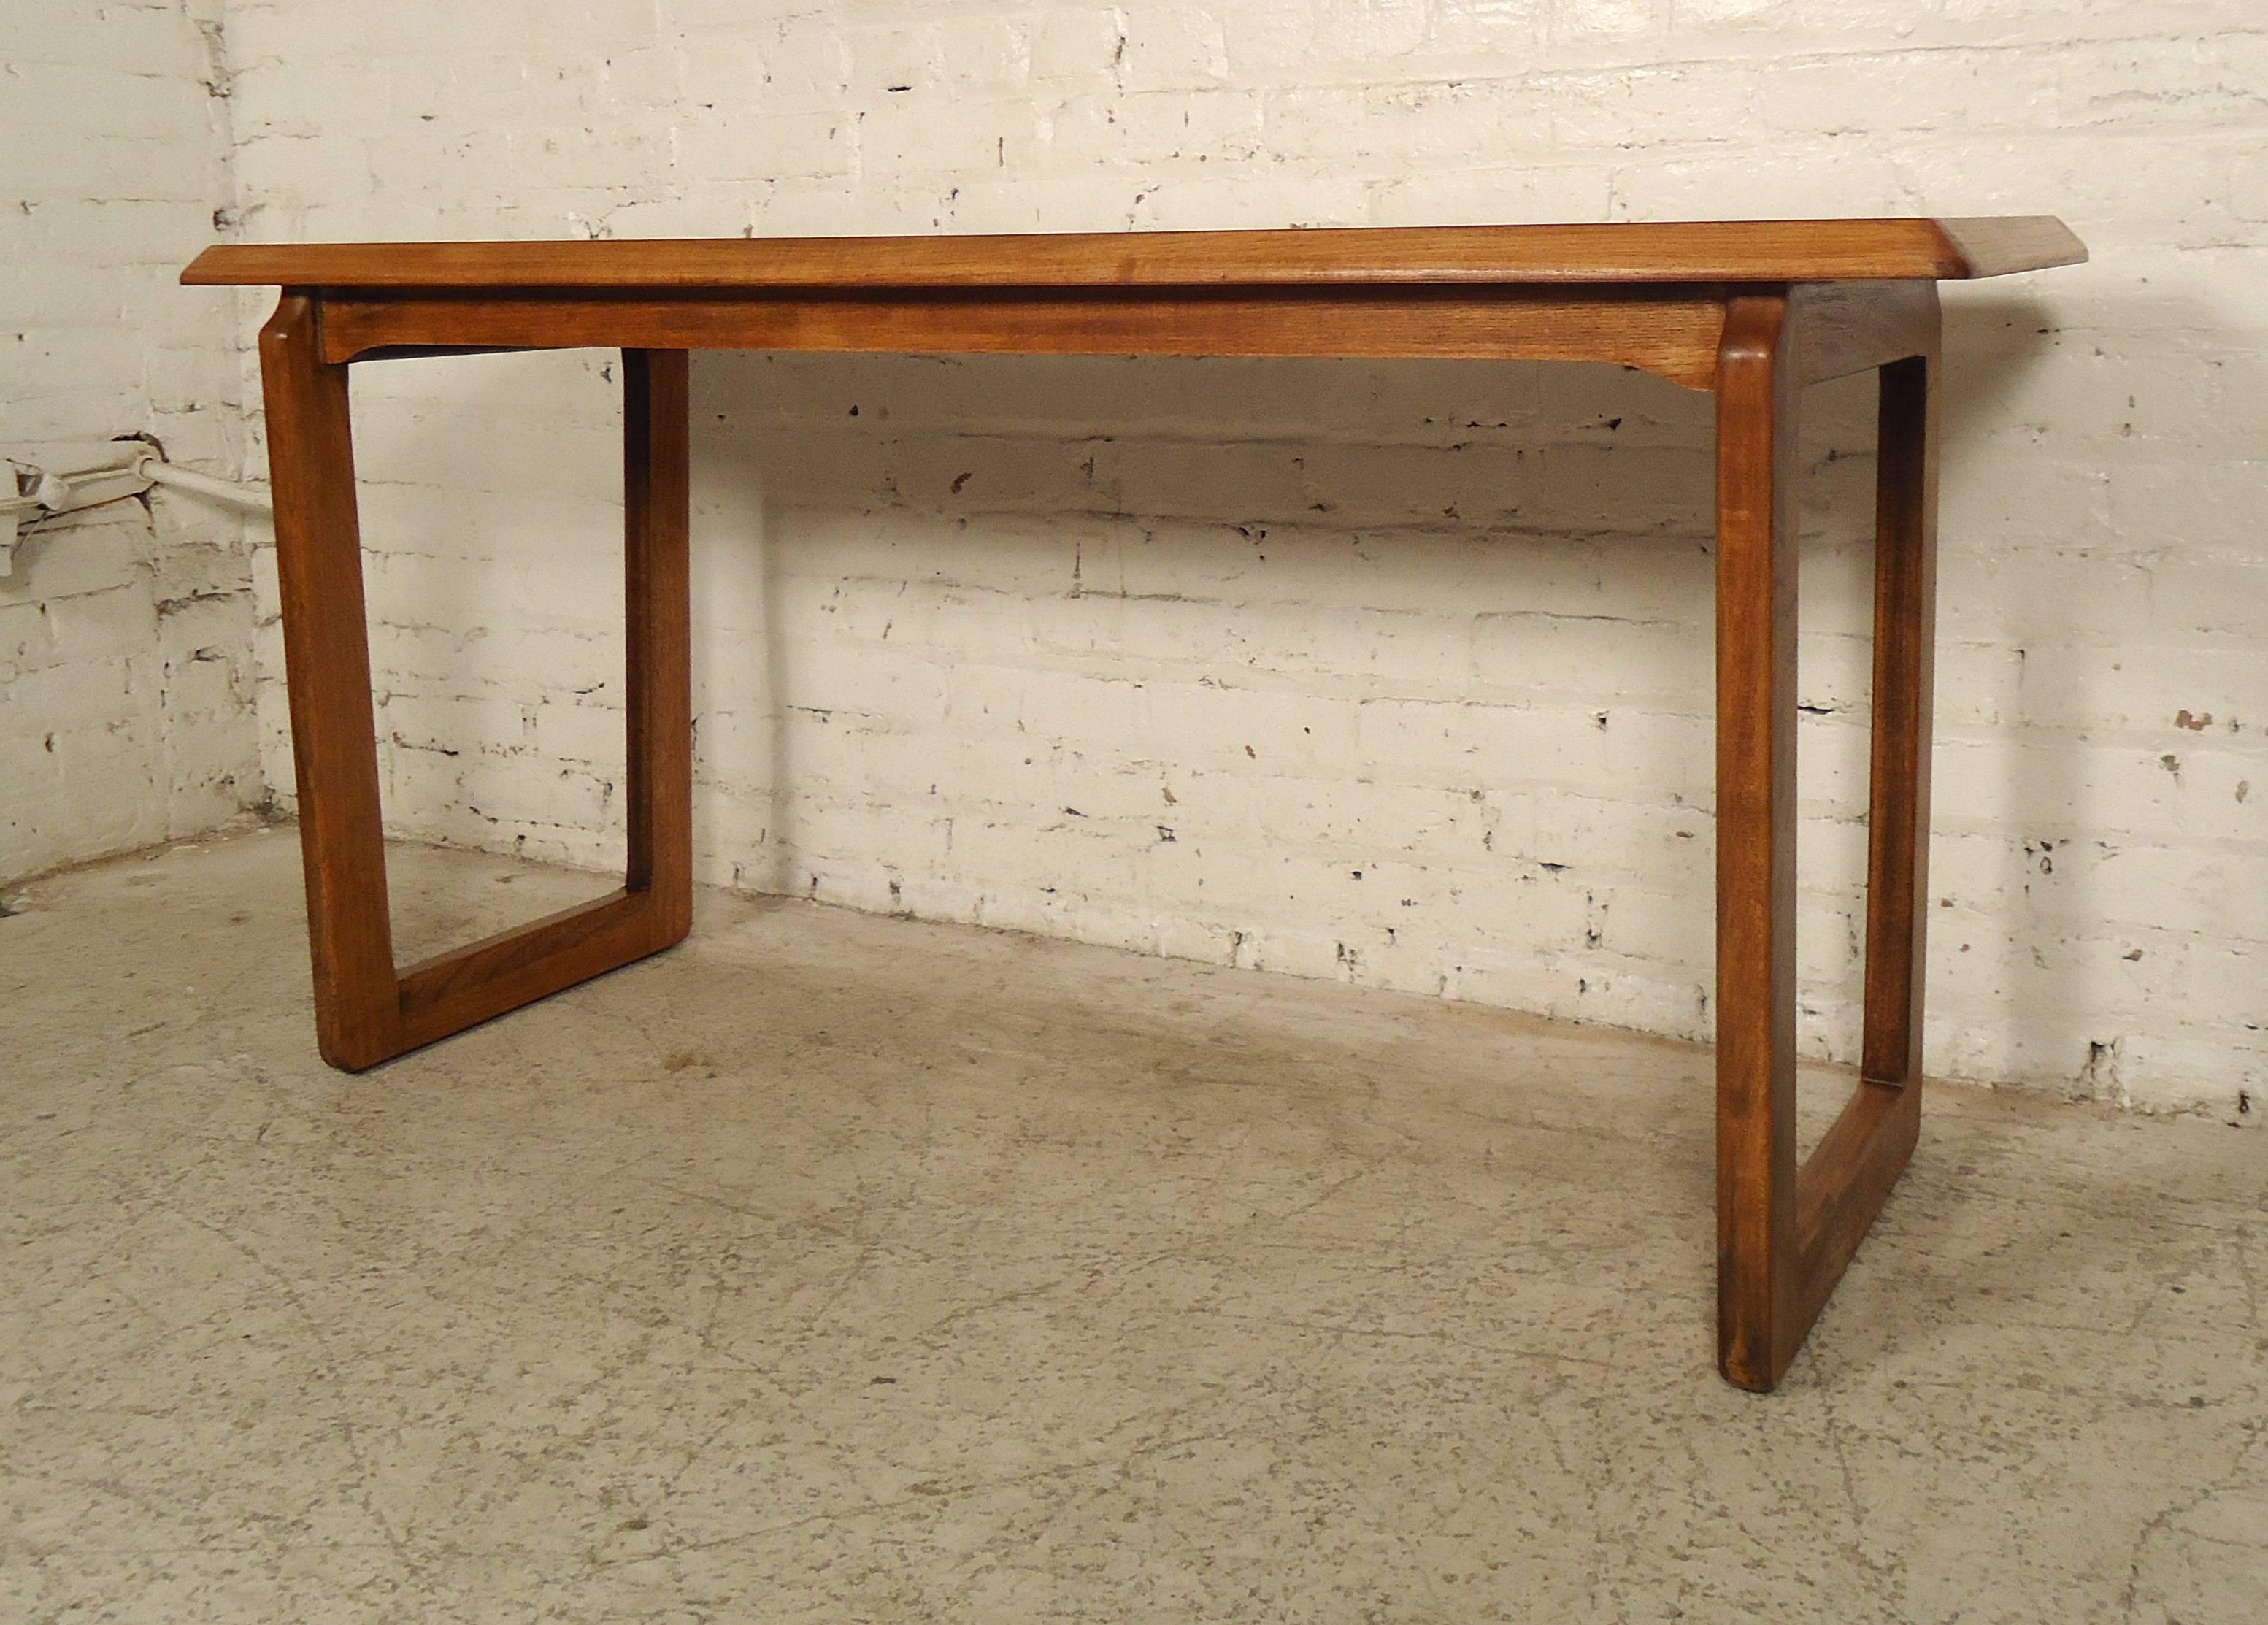 Very nice Mid-Century Modern table made of rich walnut grain by Lane on a set of sled legs.

(Please confirm item location - NY or NJ - with dealer).